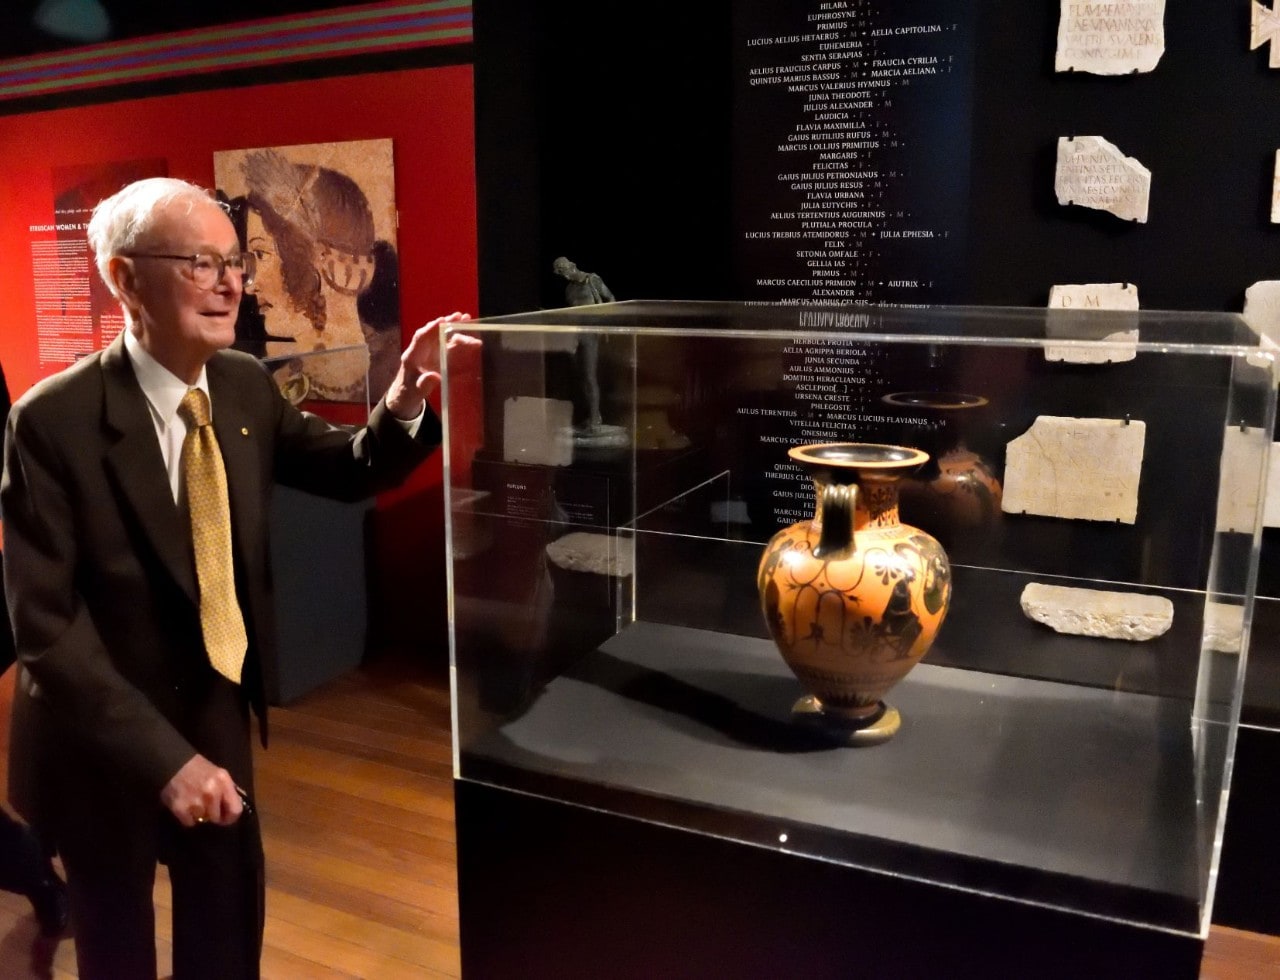 Professor Alexander Cambitoglou: at the unveiling of the Cambitoglou Amphora in Nicholson Museum in 2018.